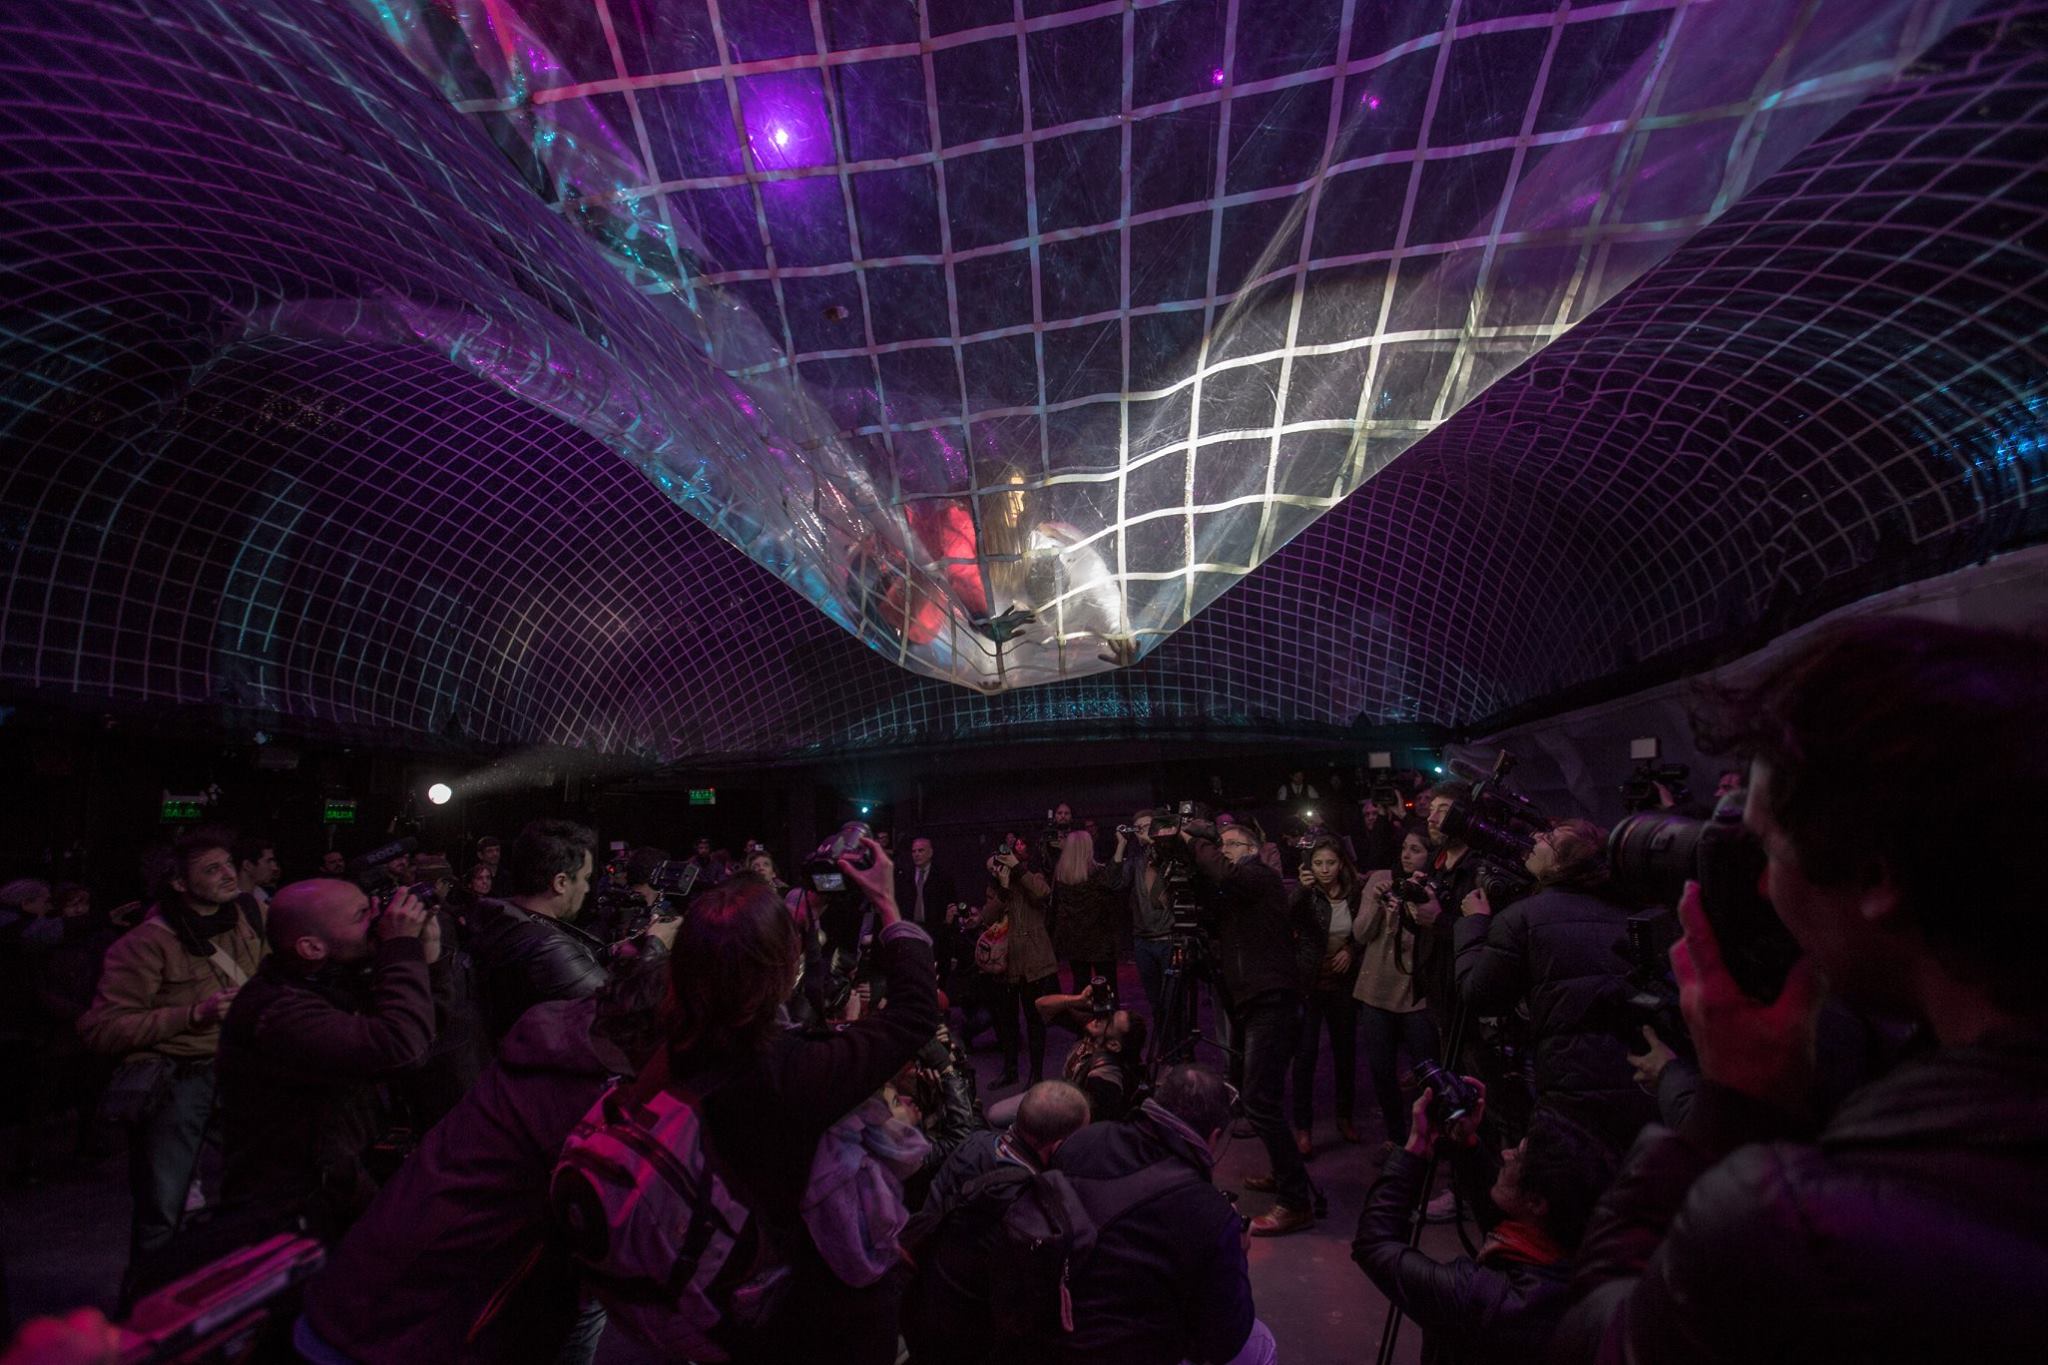 Fuerzabruta is back in Buenos Aires